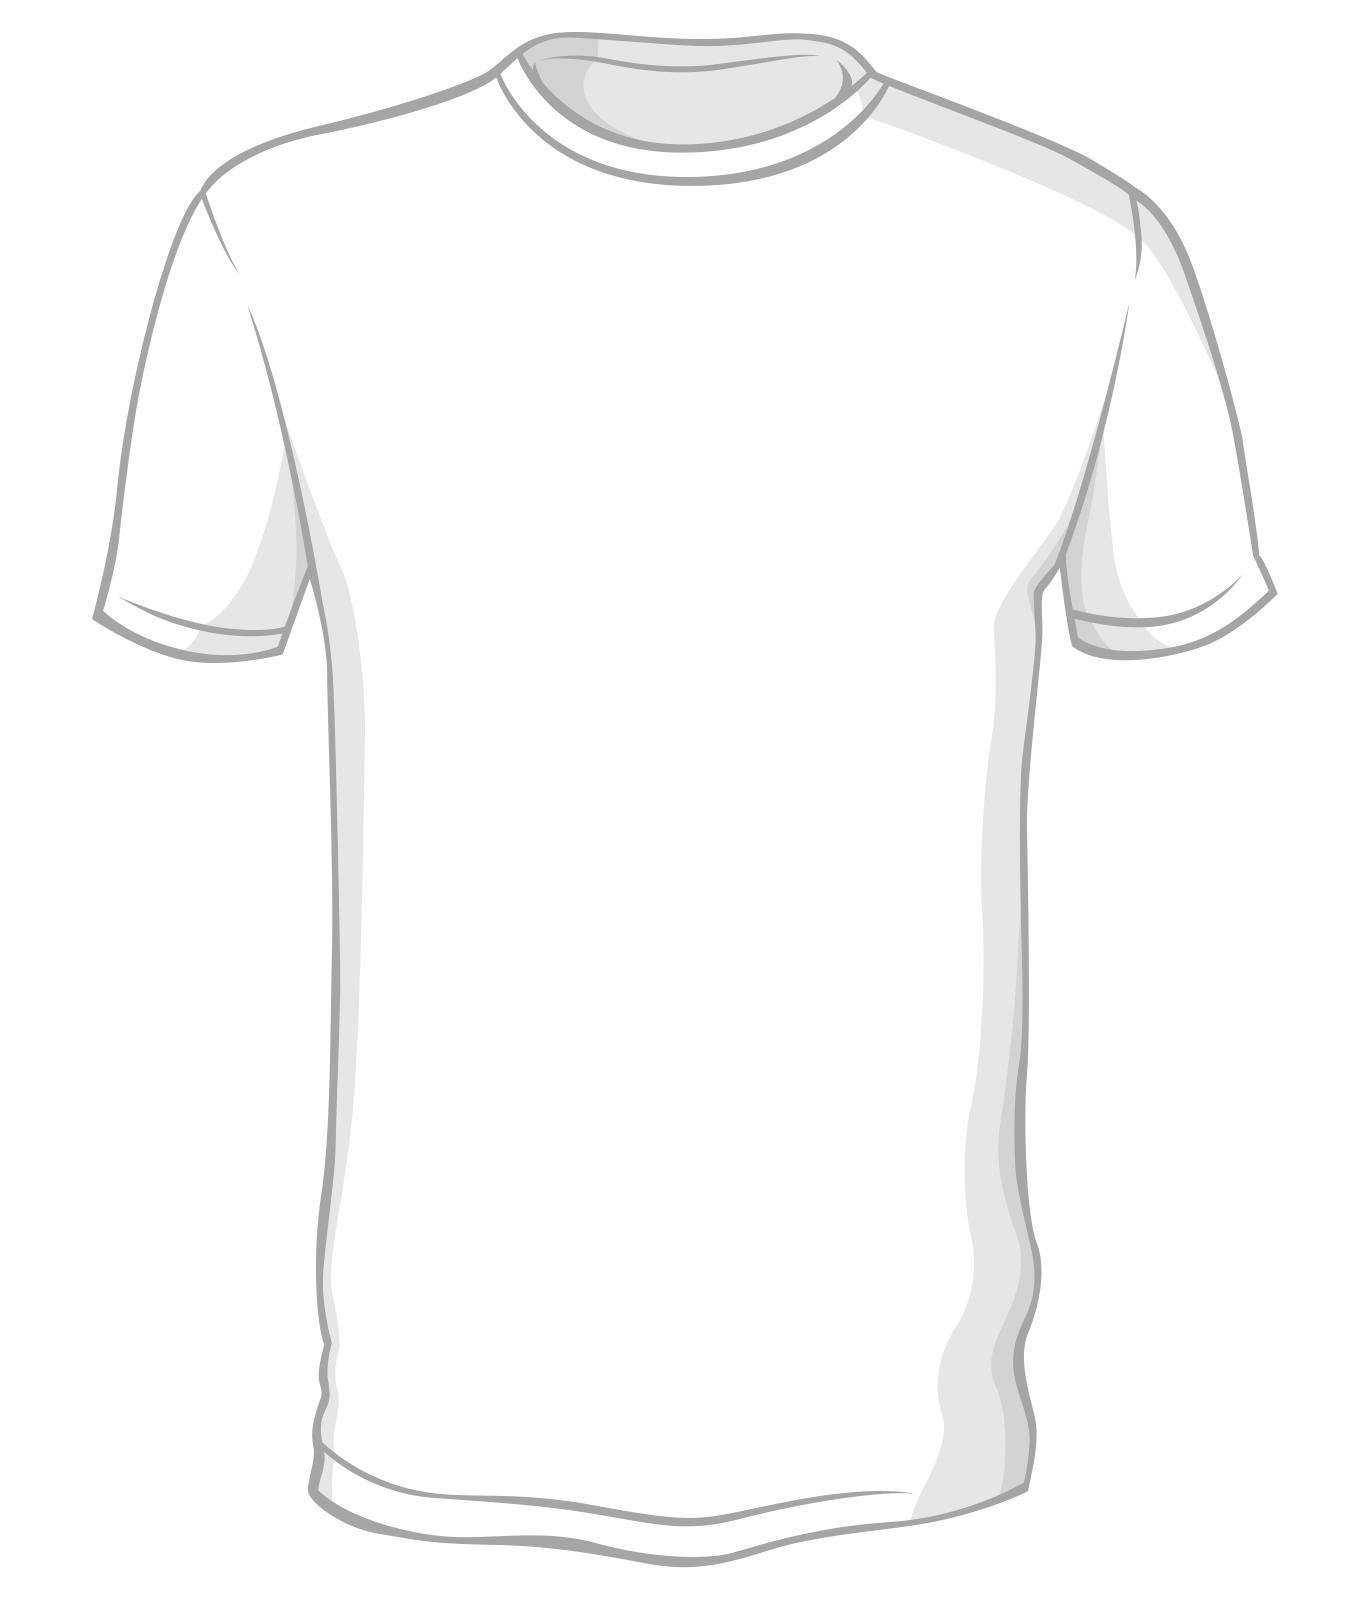 Long-Sleeved T-Shirt Vector Pure White Hand-Painted Clipart